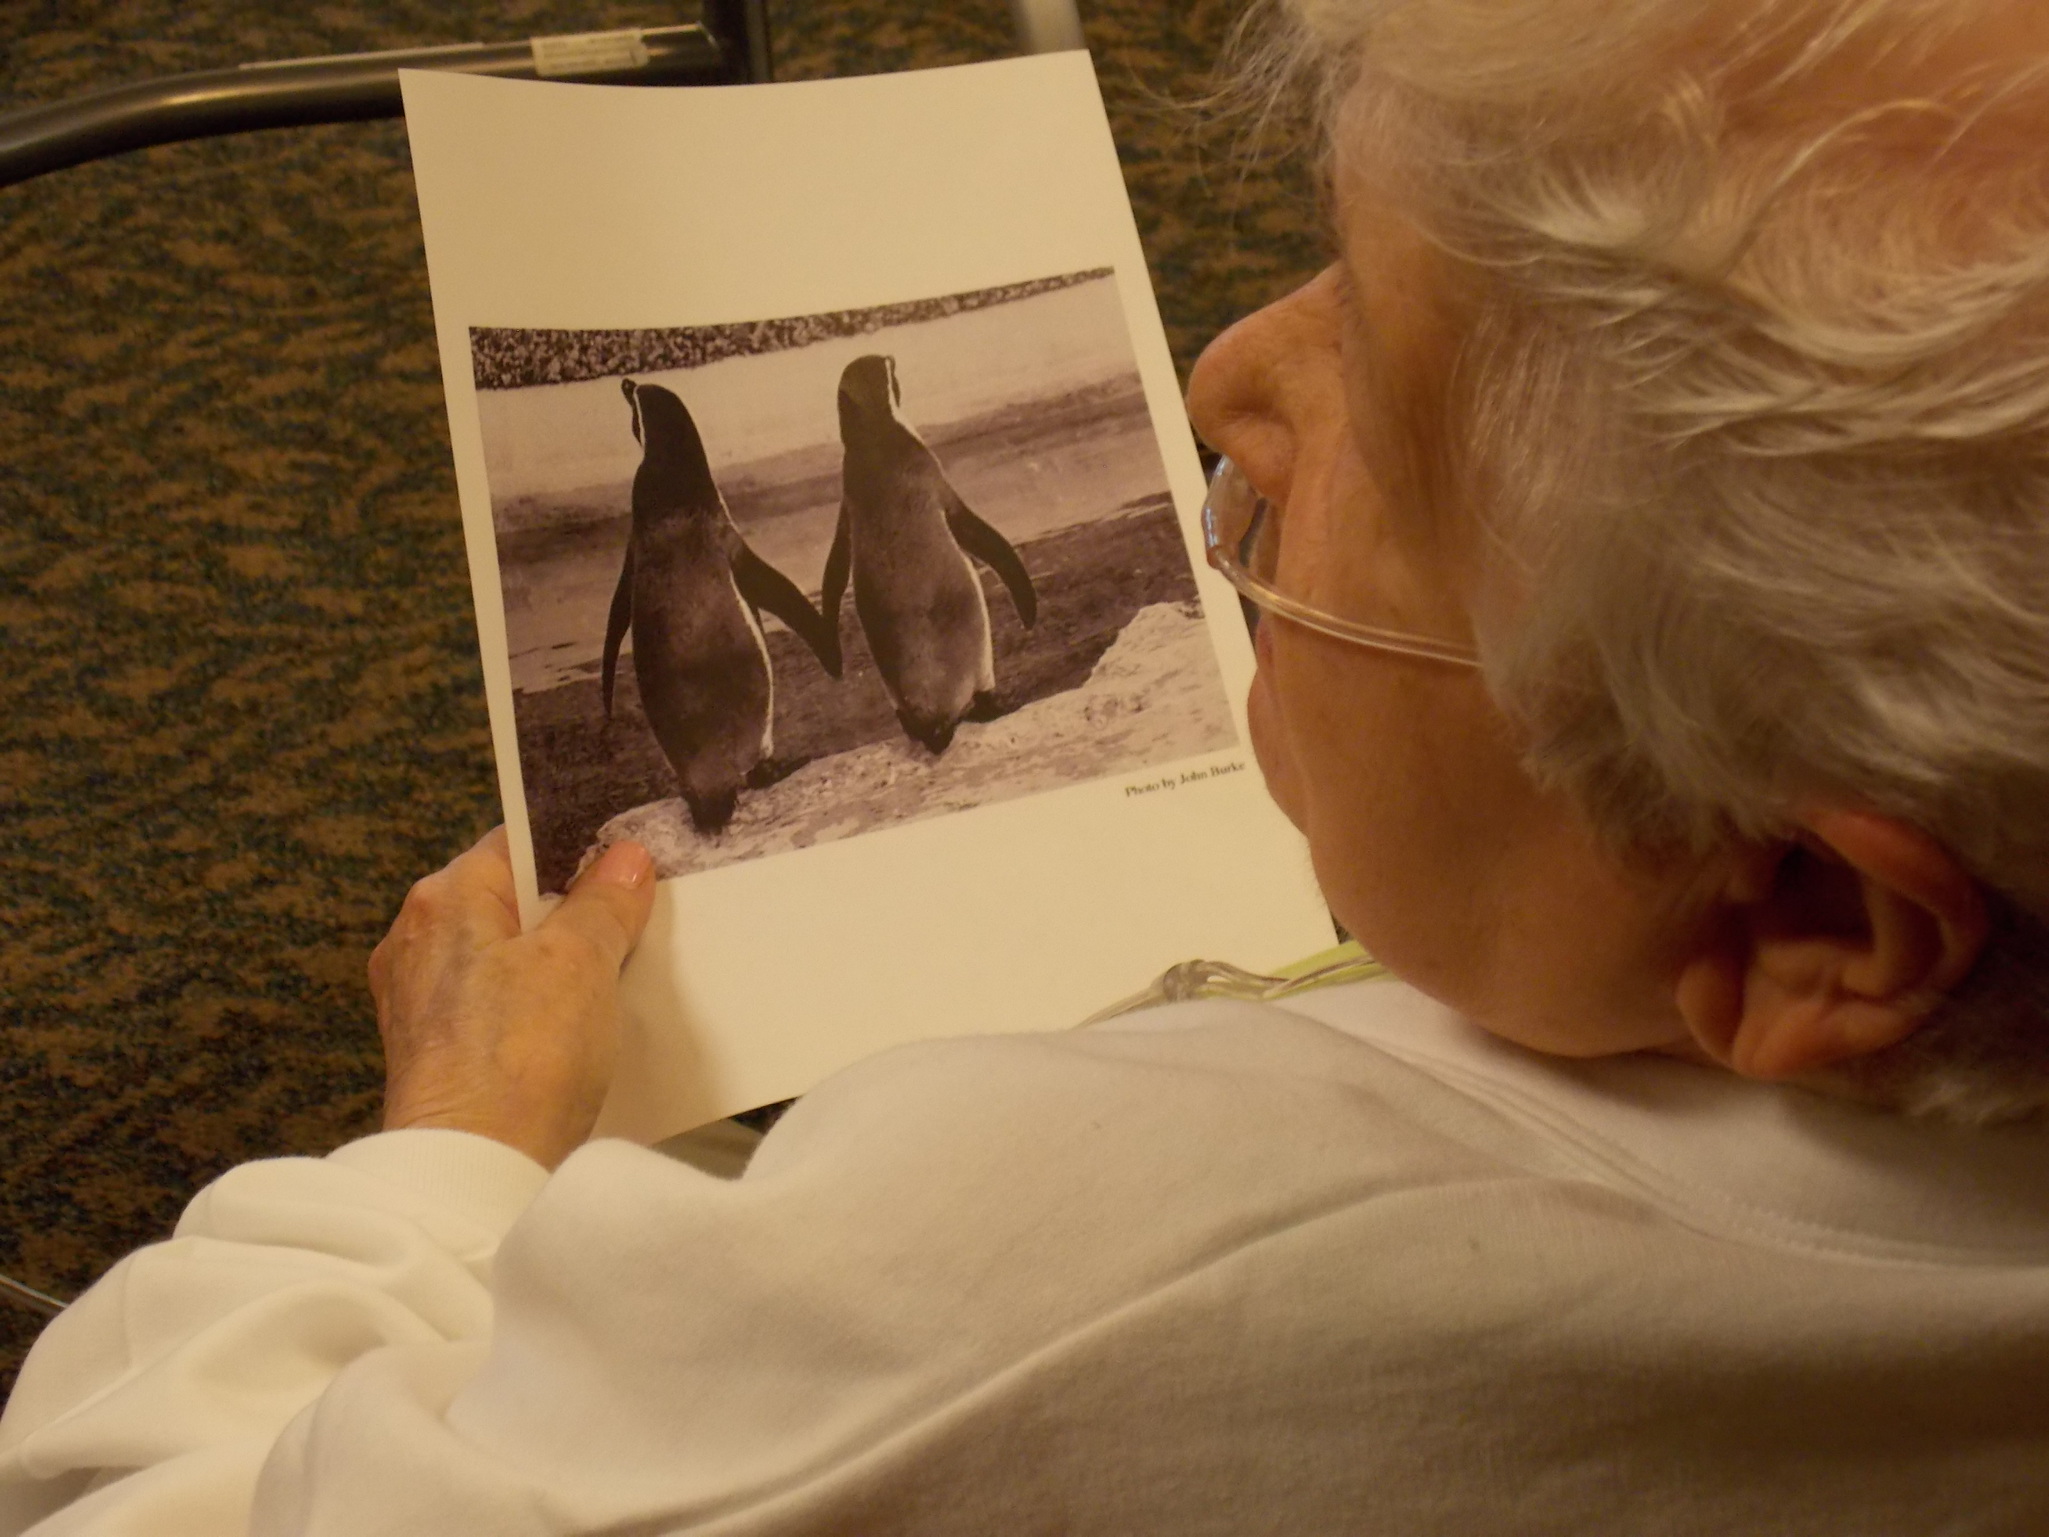 The TimeSlips program uses pictures as creative conversational prompts for people with dementia. An older woman is pictured, seated, holding a piece of paper on which a photo of two penguins is visible. The woman is wearing an oxygen cannula in her nose.